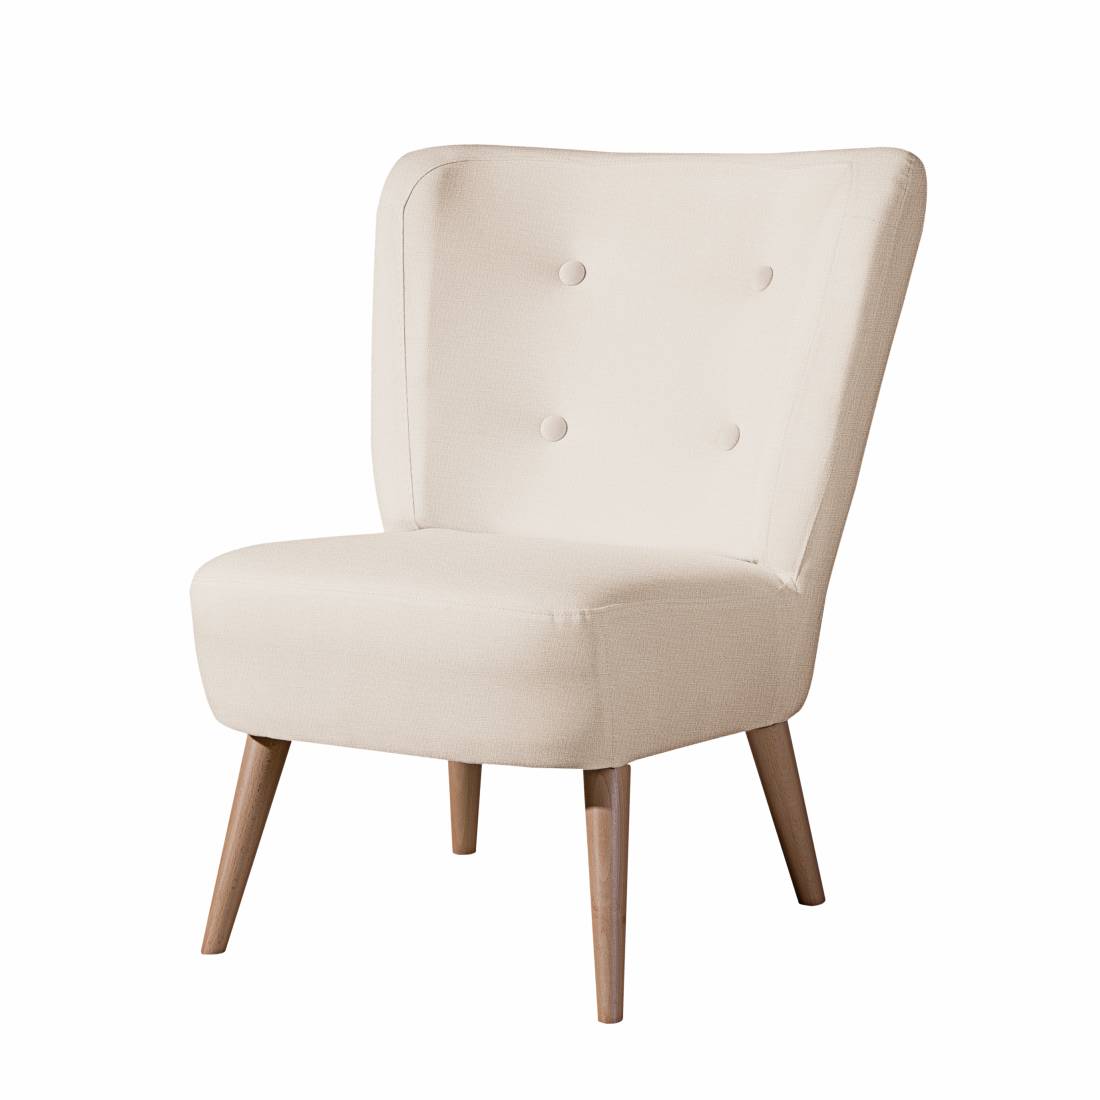 Sessel Mary - Stoff Beige, Max Winzer